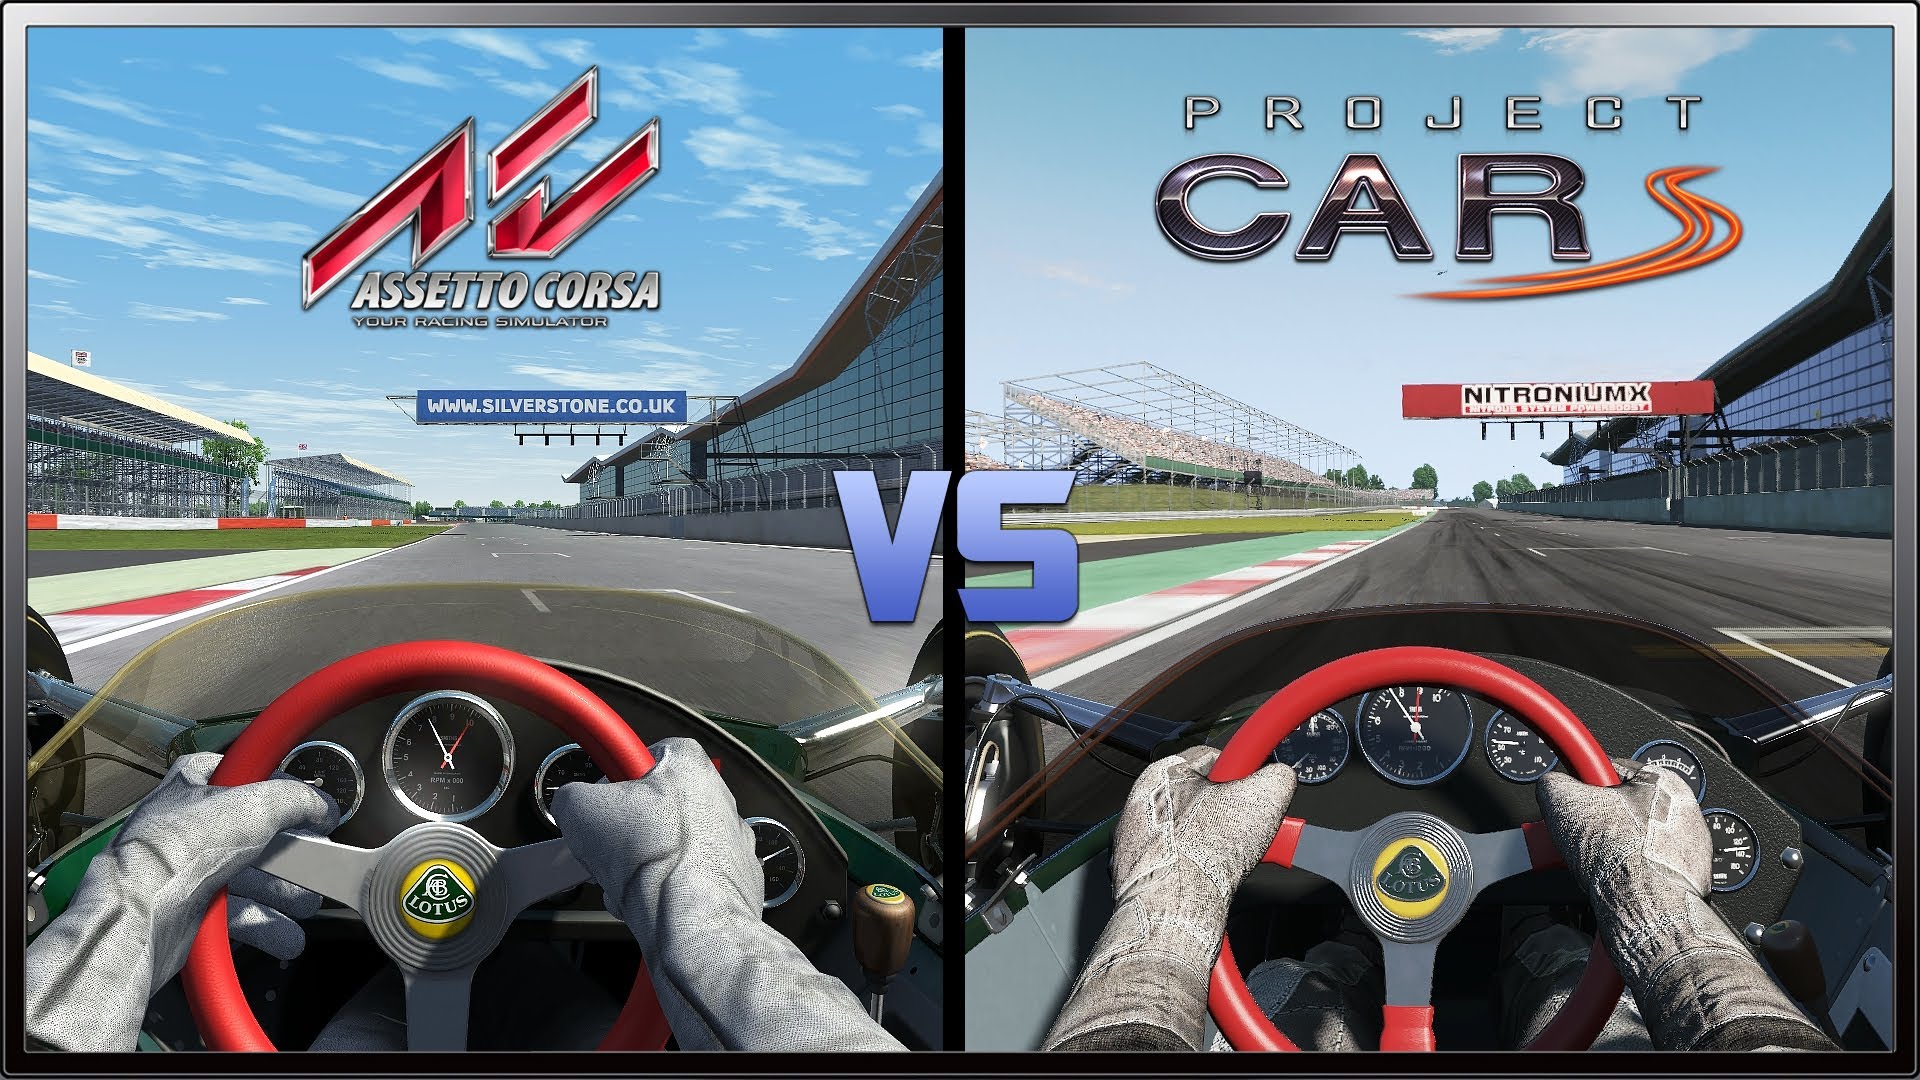 assetto corsa or project cars 2